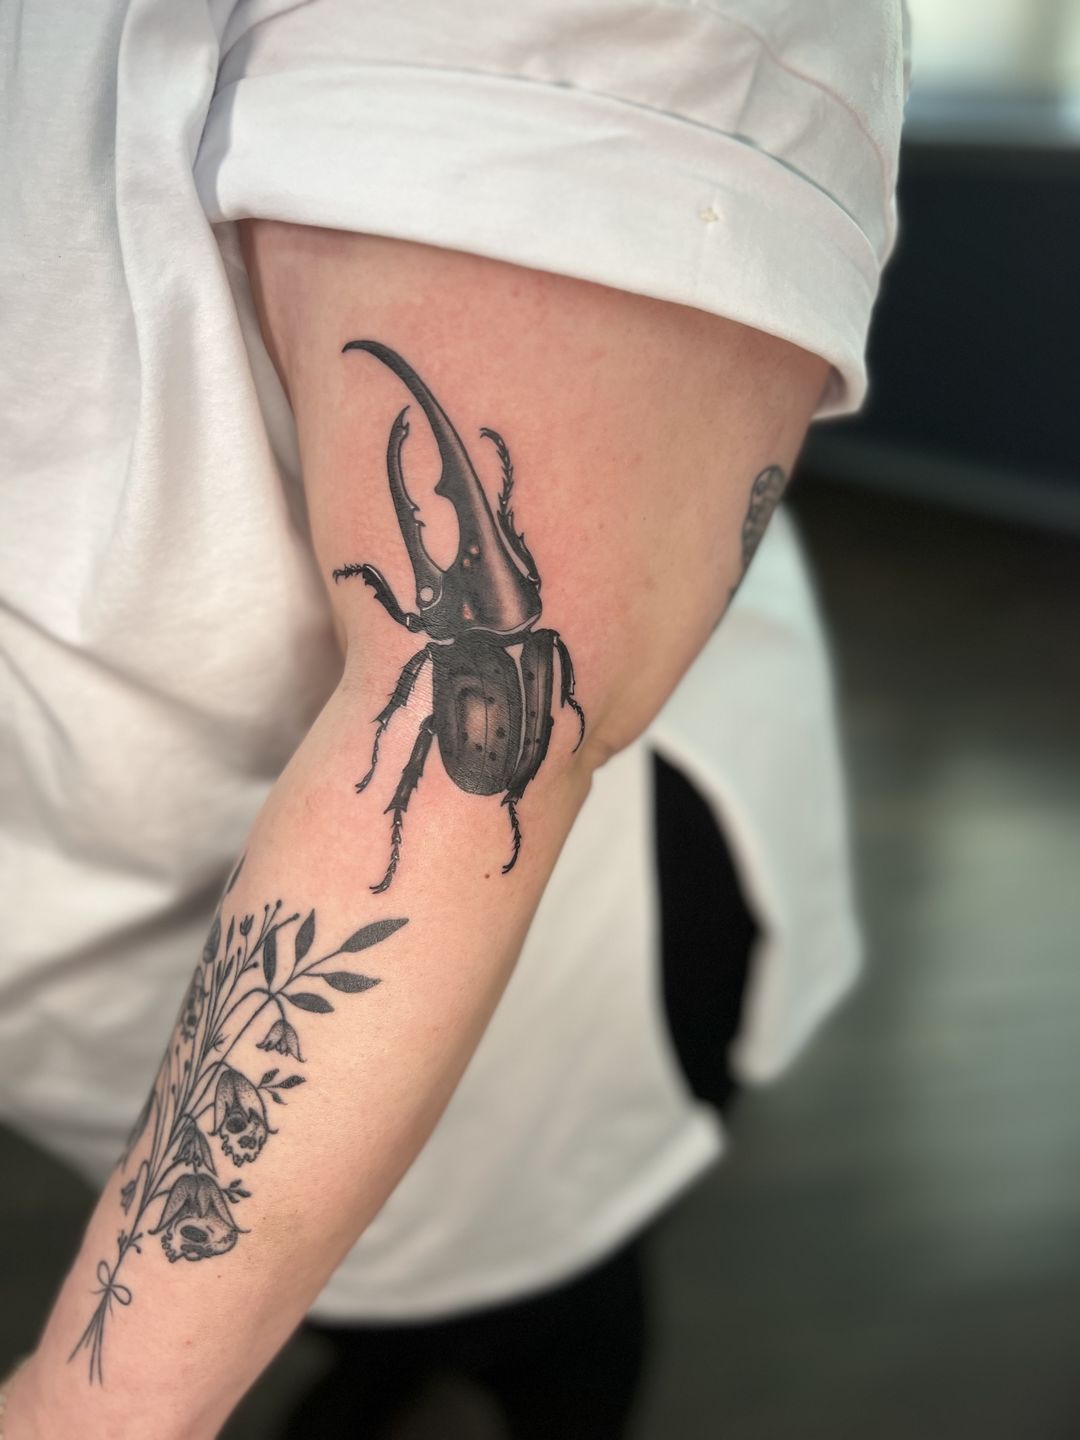 101 Best Beetle Tattoo Ideas You Have To See To Believe!